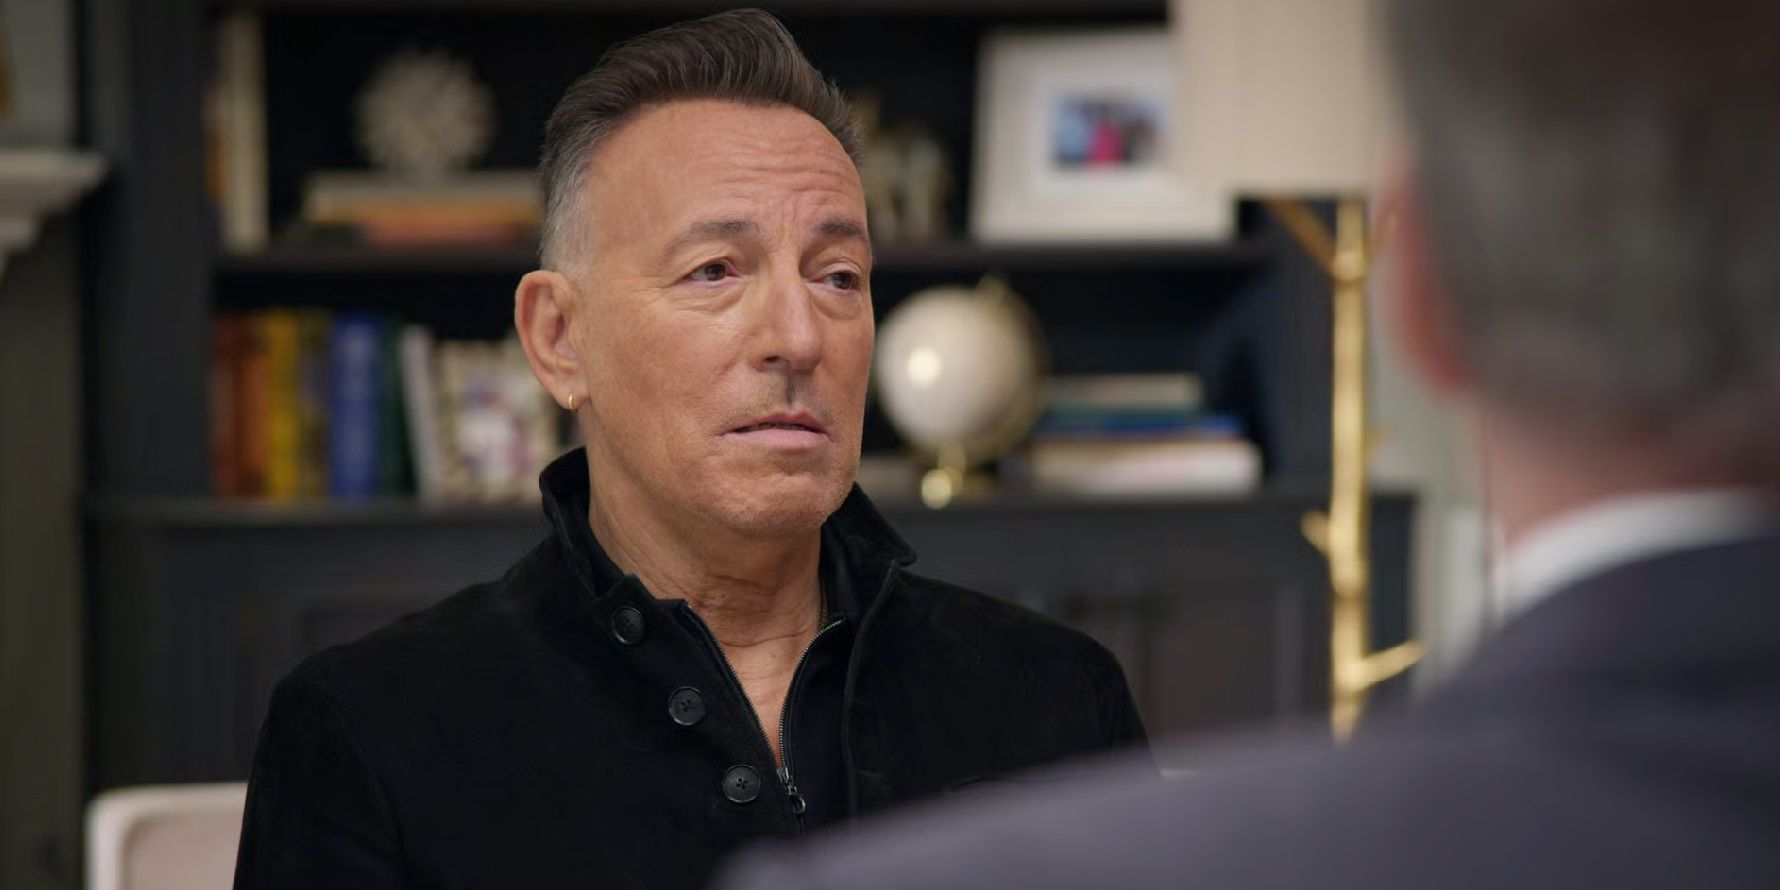 Bruce Springsteen at a dinner table in Curb Your Enthusiasm